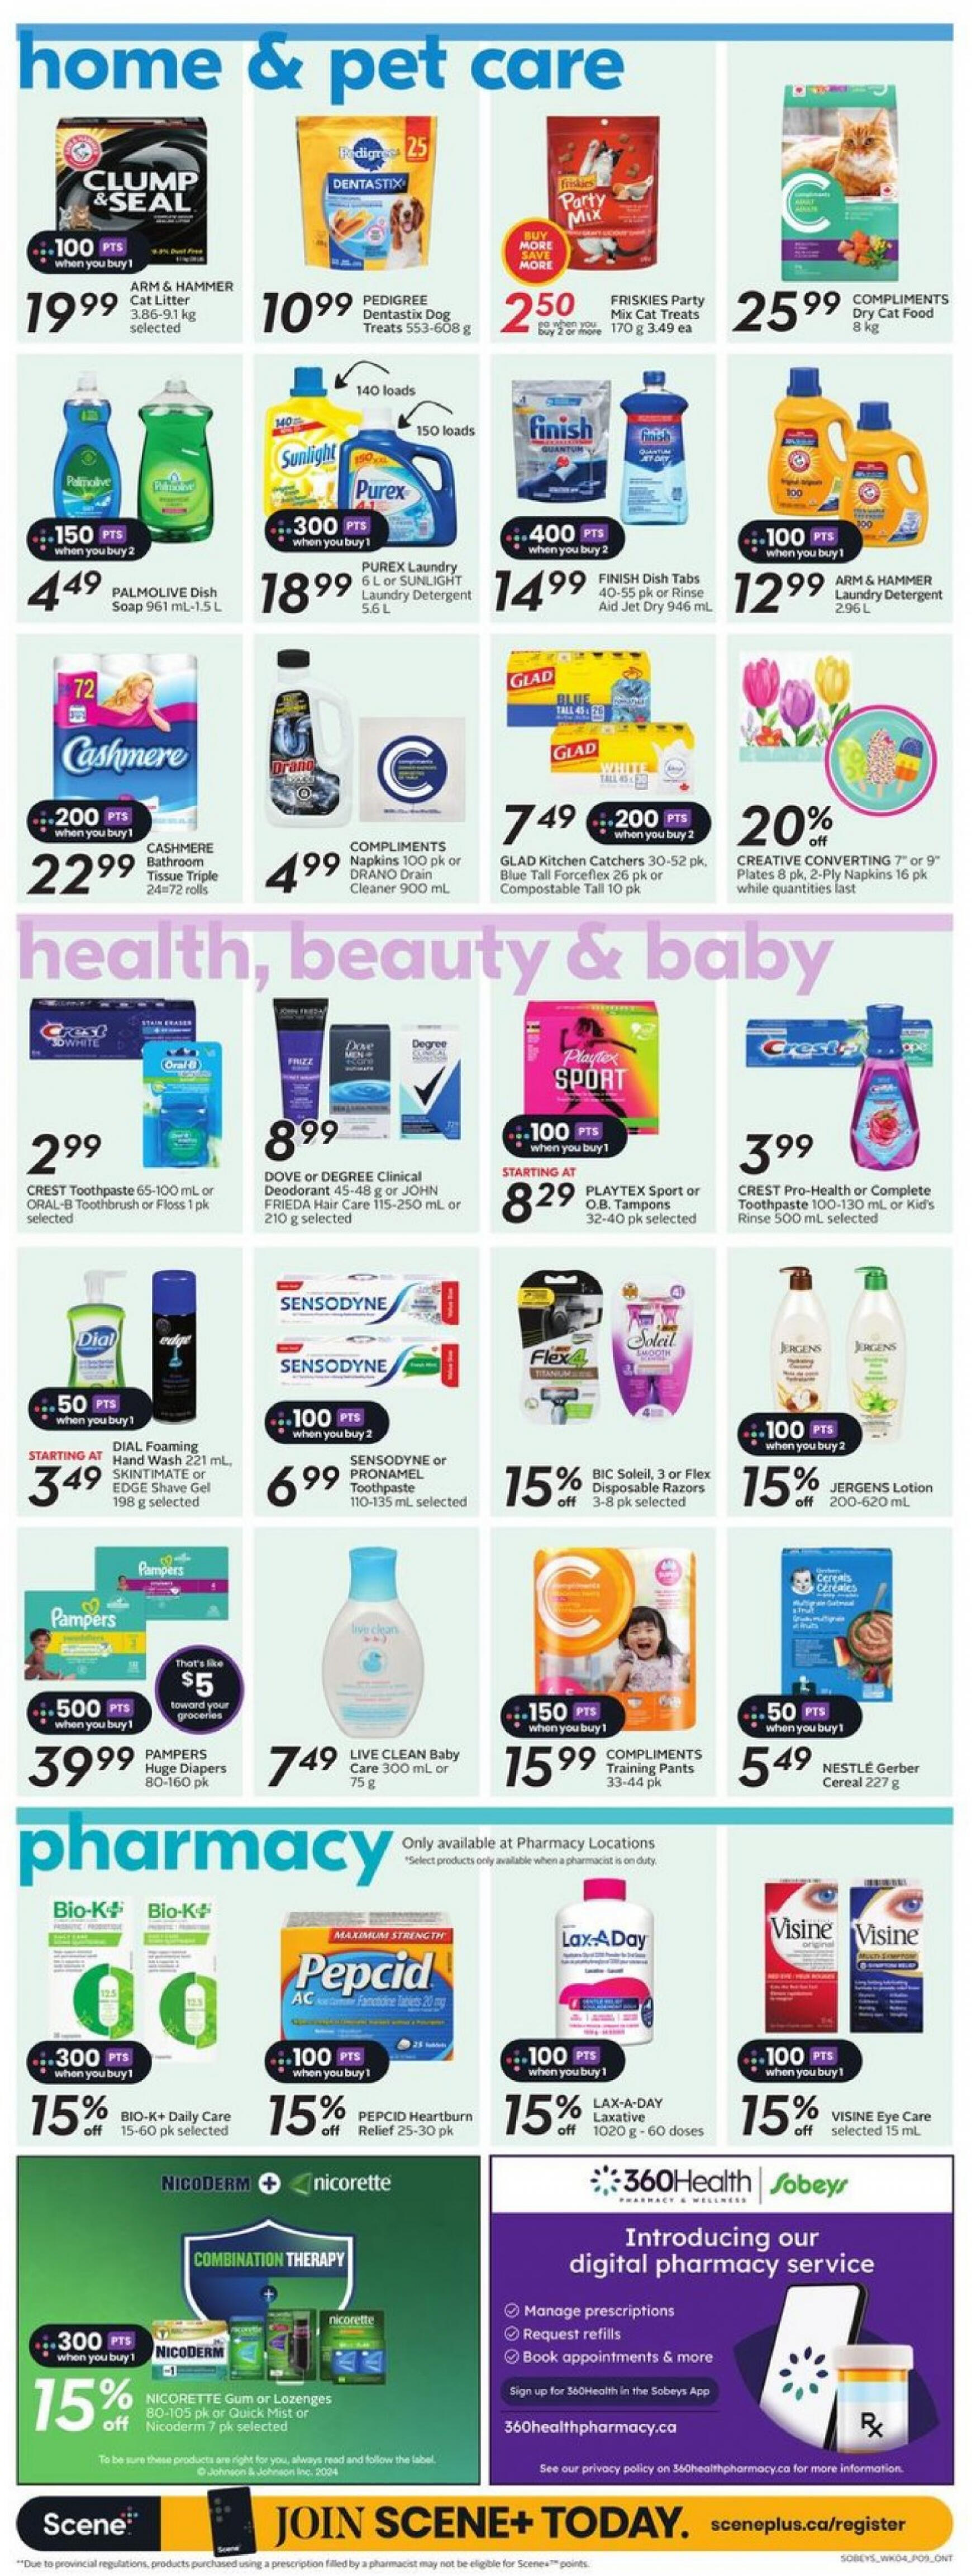 sobeys - Sobeys - Weekly Flyer - Ontario flyer current 23.05. - 29.05. - page: 20